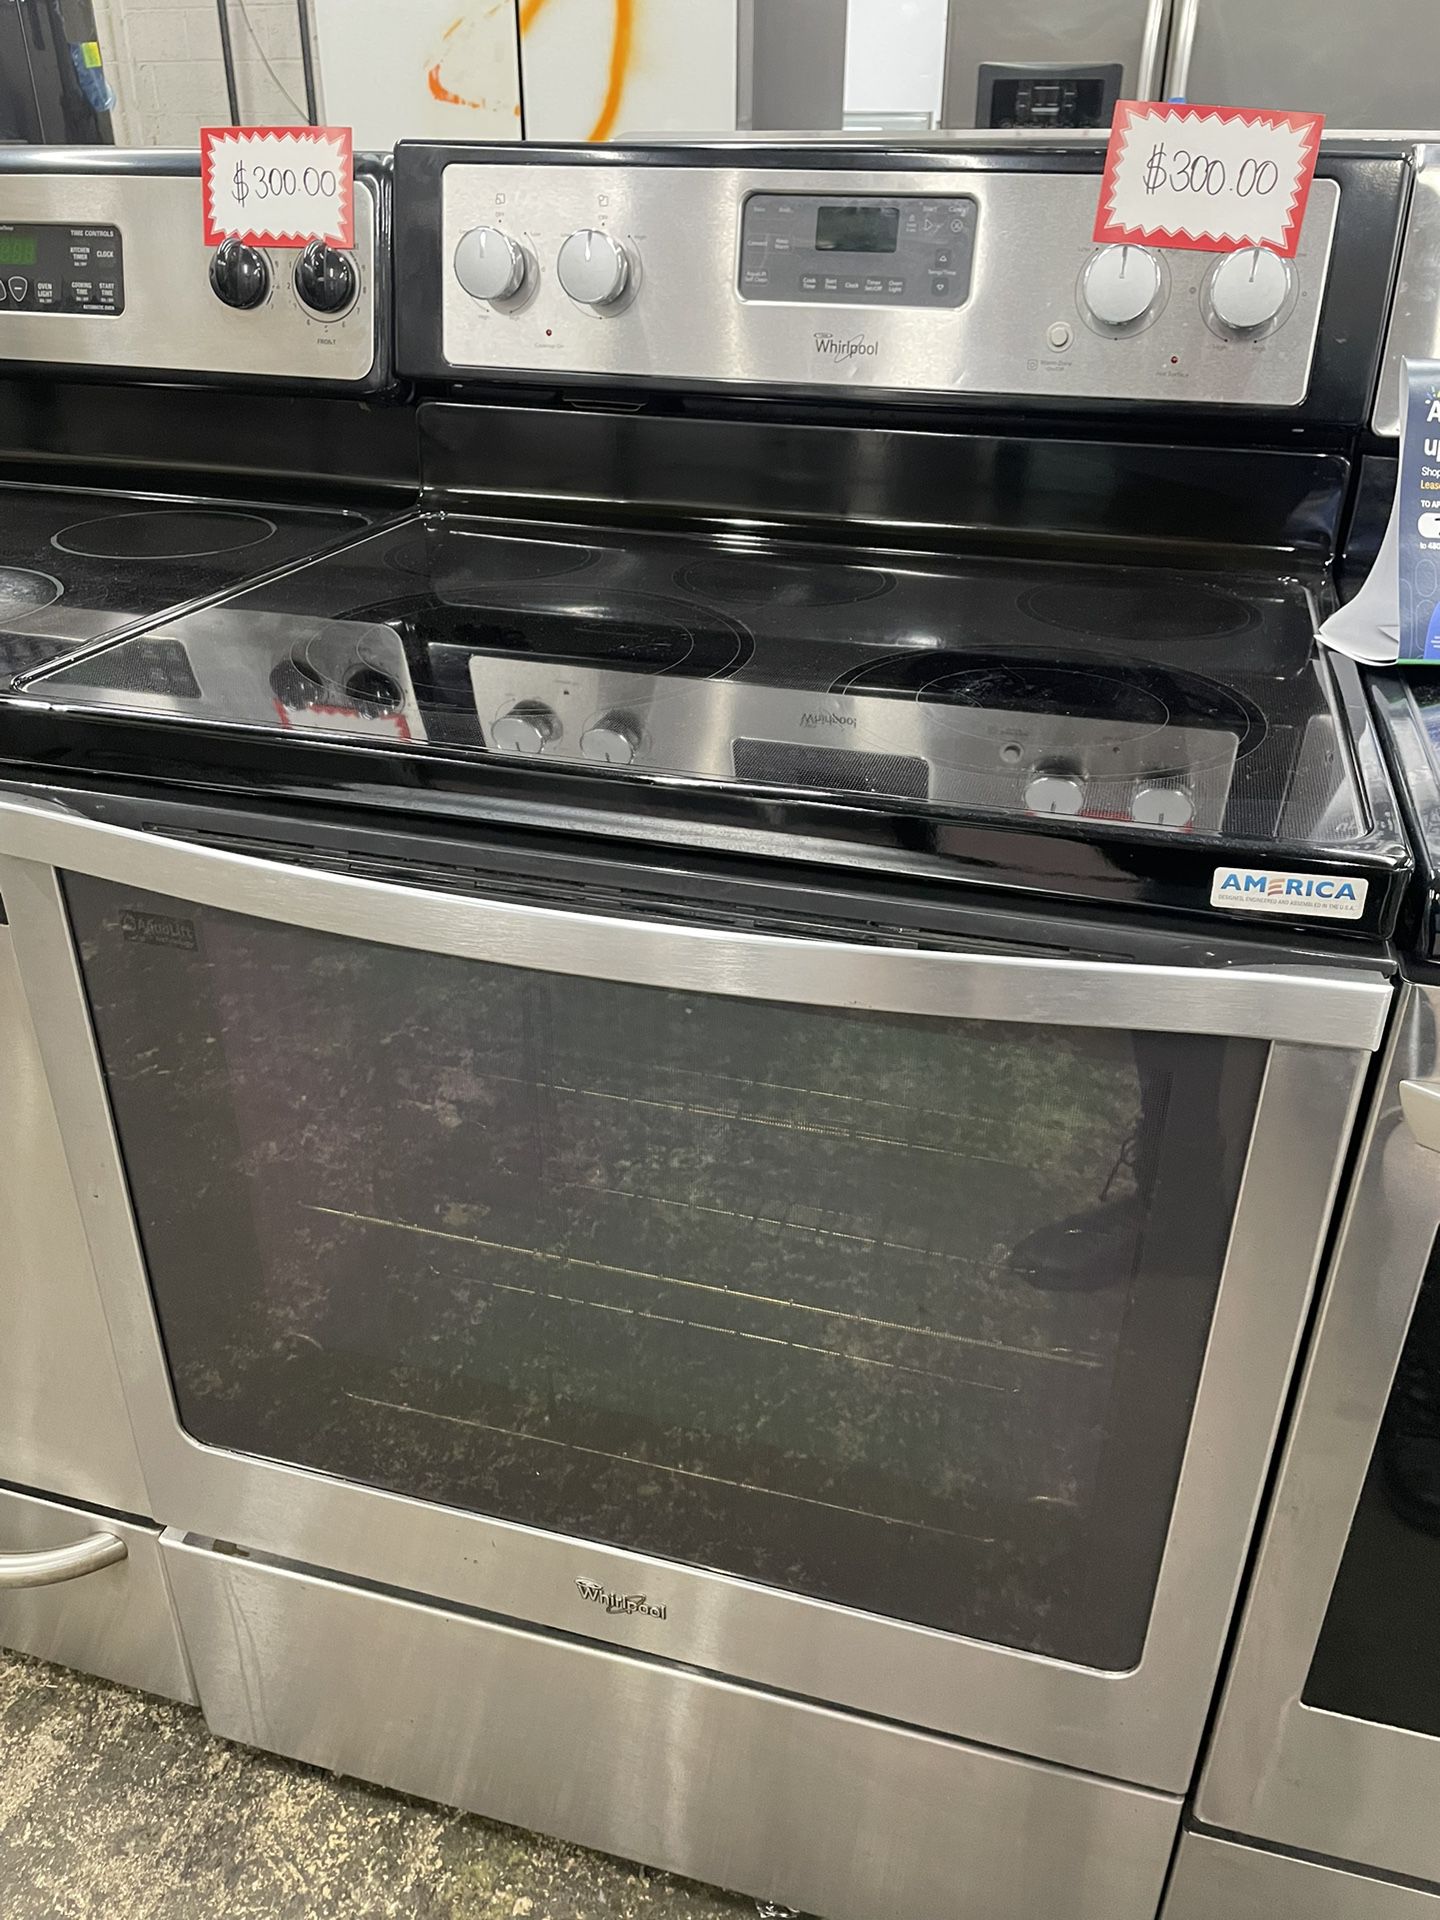 Whirlpool Electric Stove 4 Months Warranty We Are Located In The Blue Building 🟦